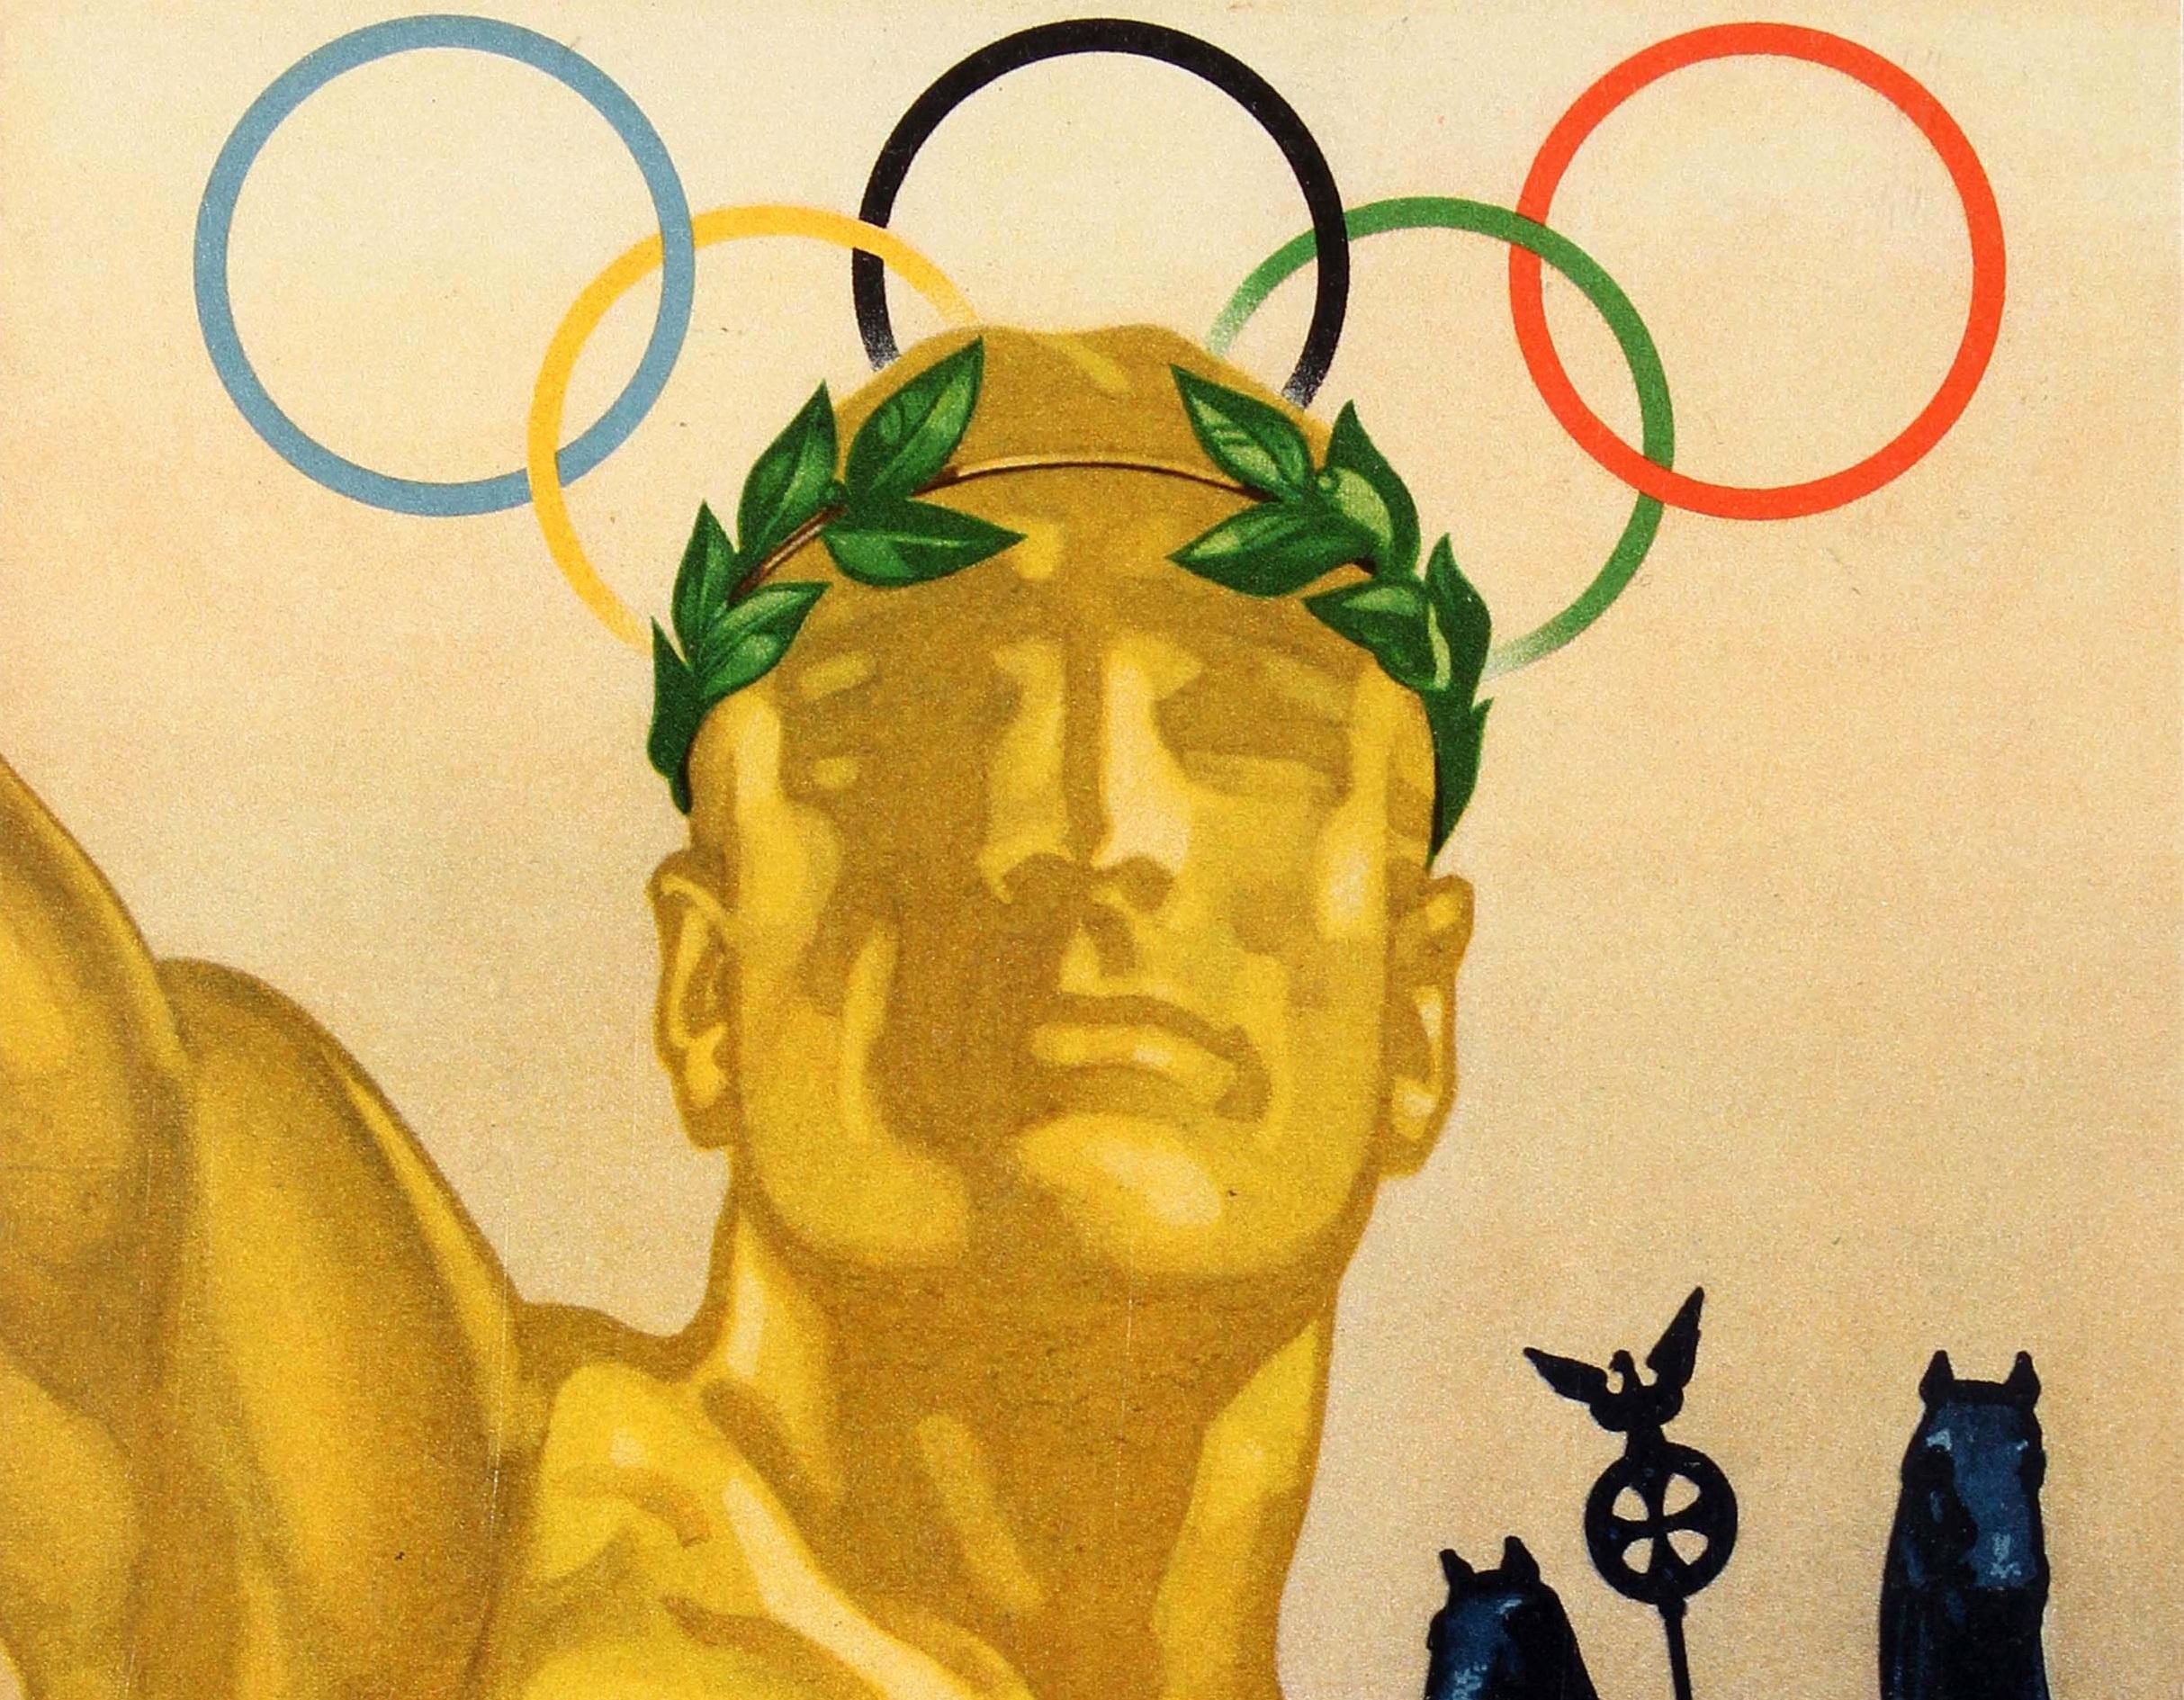 Original vintage Summer Olympic Games poster for the 1936 Olympic Games held in Berlin from 1-16 August, published by the Reichsbahnzentrale fur den Deutschen Reiseverkehr (German Railways Head Office for Tourist Traffic) and the Propaganda